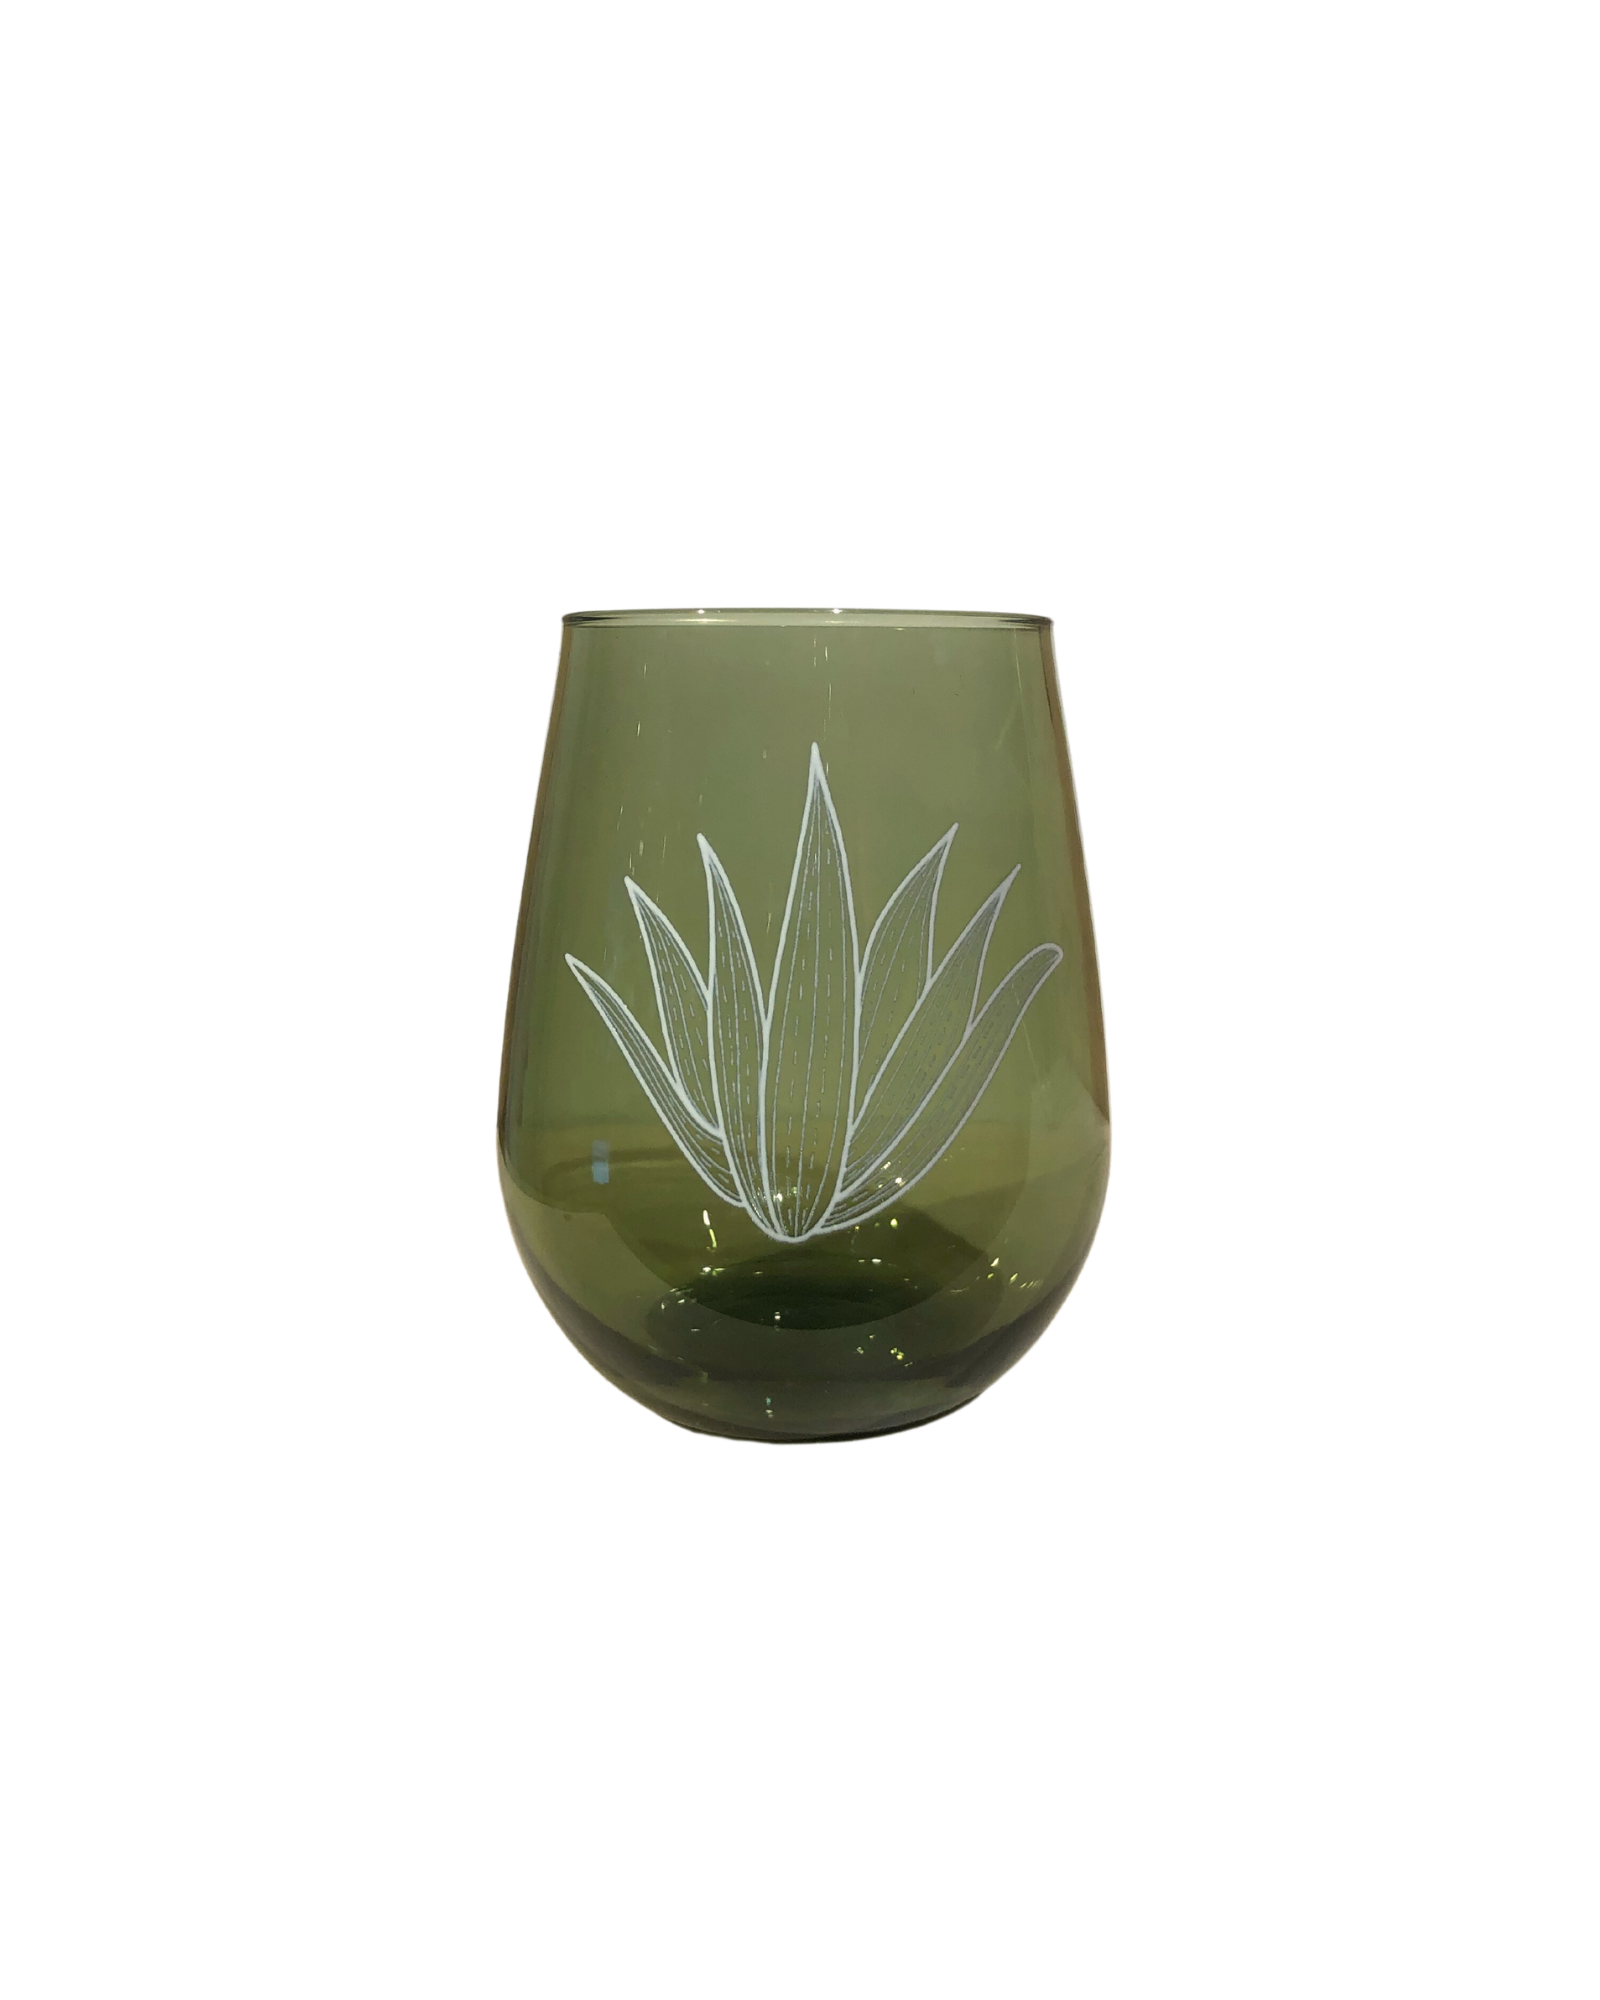 Green plastic wine glass with a white line drawing of an agave plant on the front center